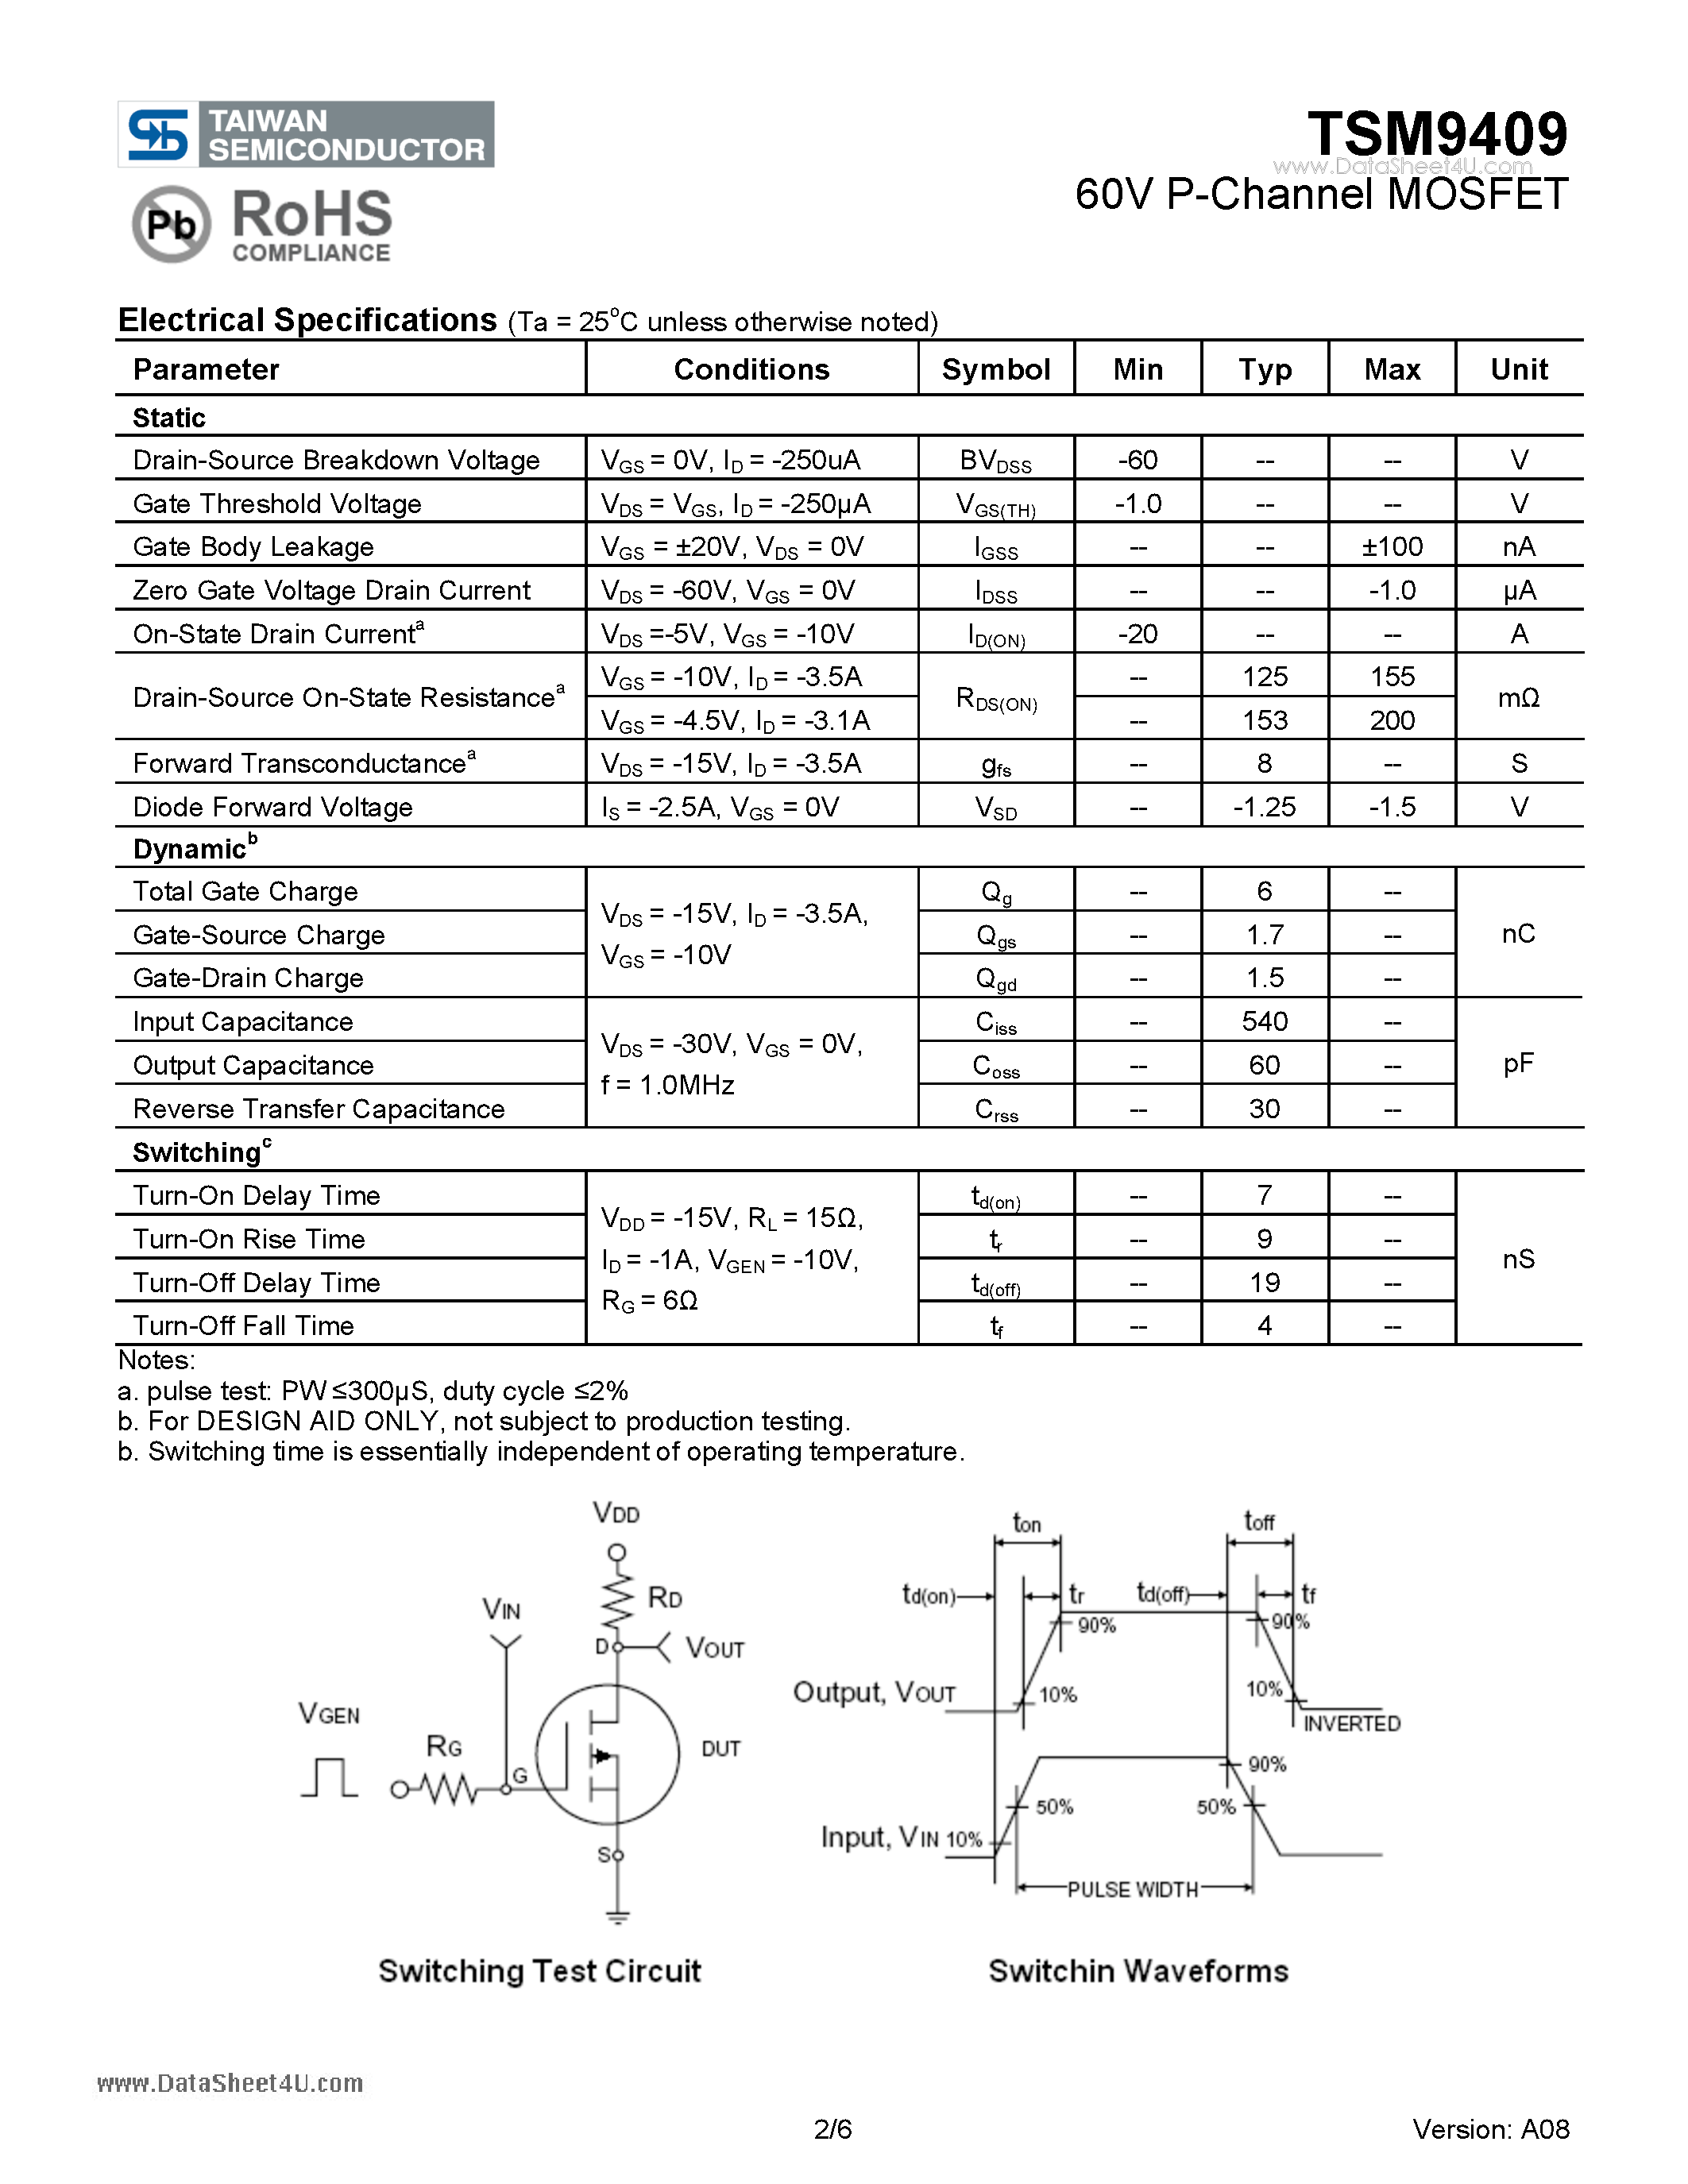 Datasheet TSM9409 - 60V P-Channel MOSFET page 2